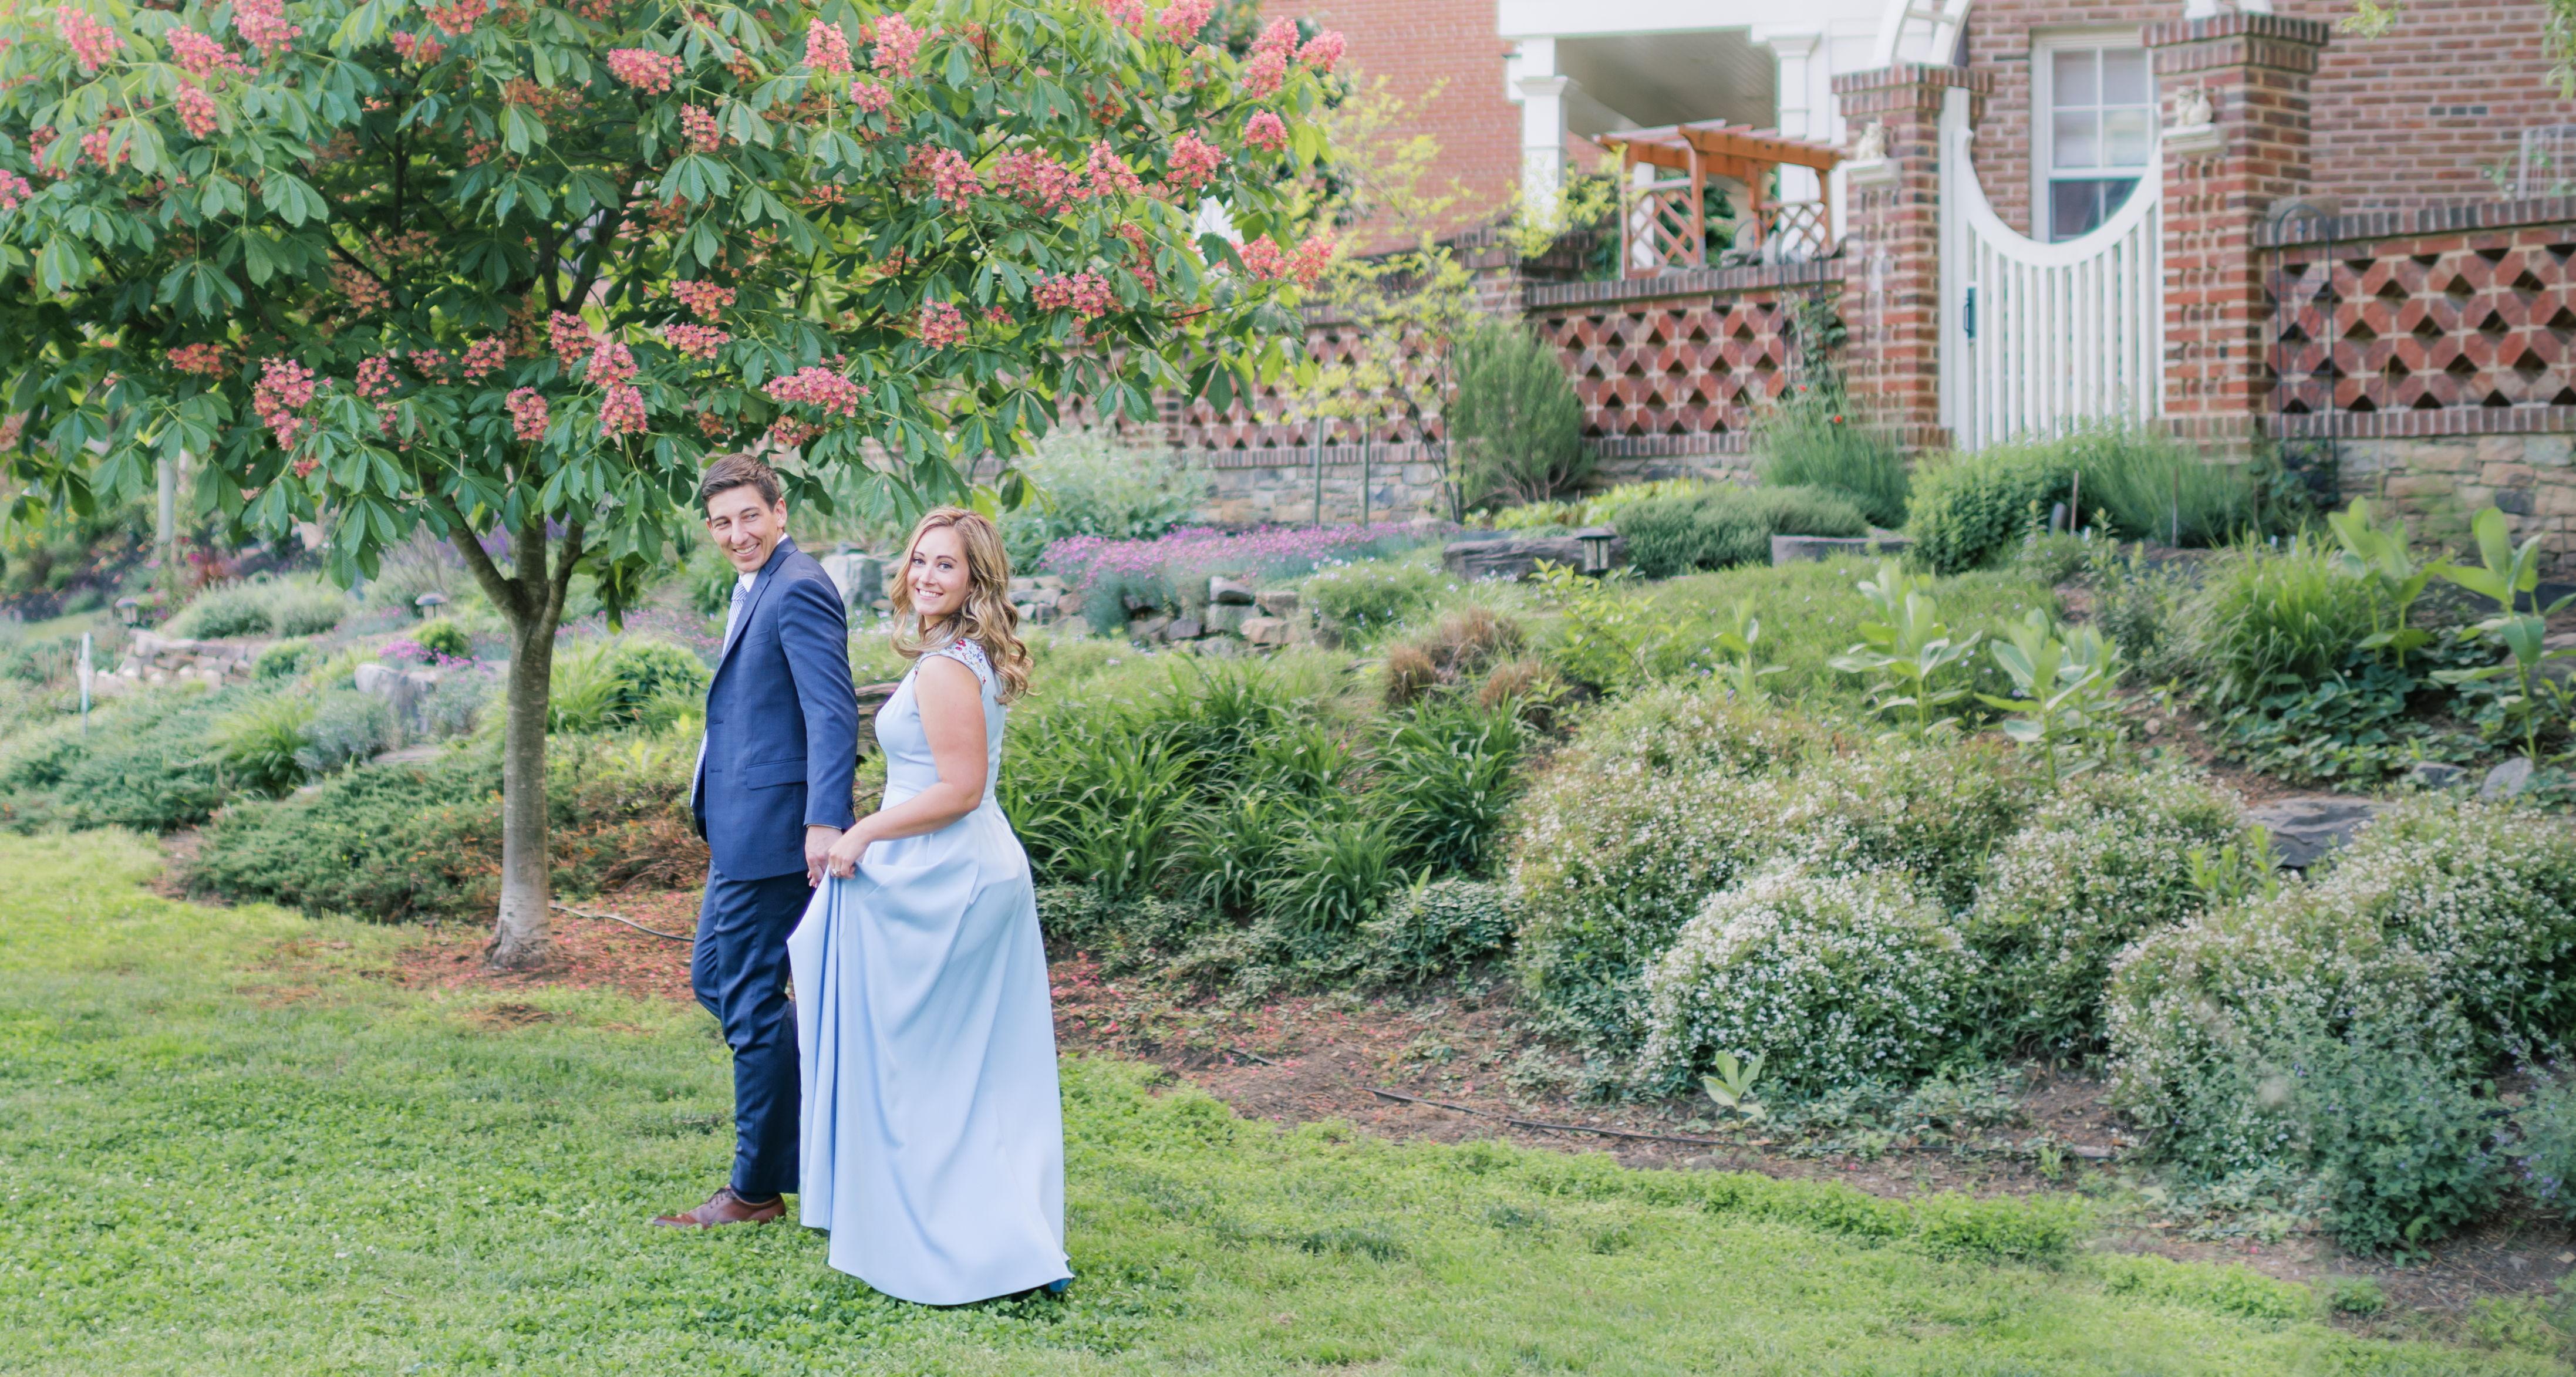 The Wedding Website of Kelsey O’Brien and Ryan Vosburgh